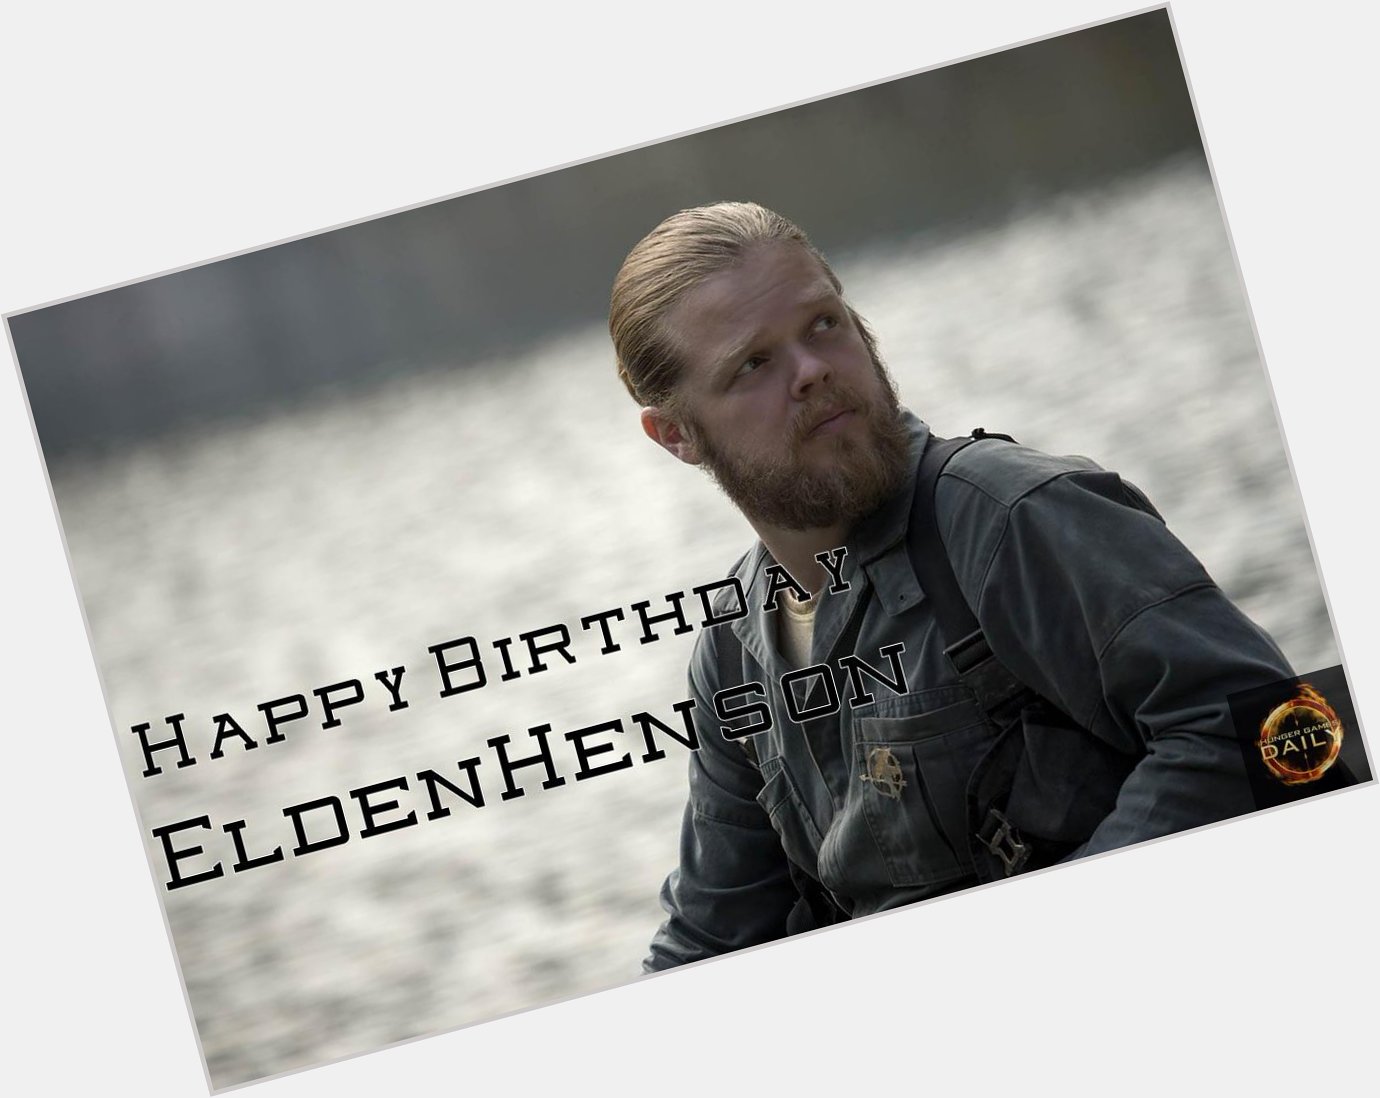 And also Happy Birthday to Elden Henson, our Pollux! We can´t wait to see you in 